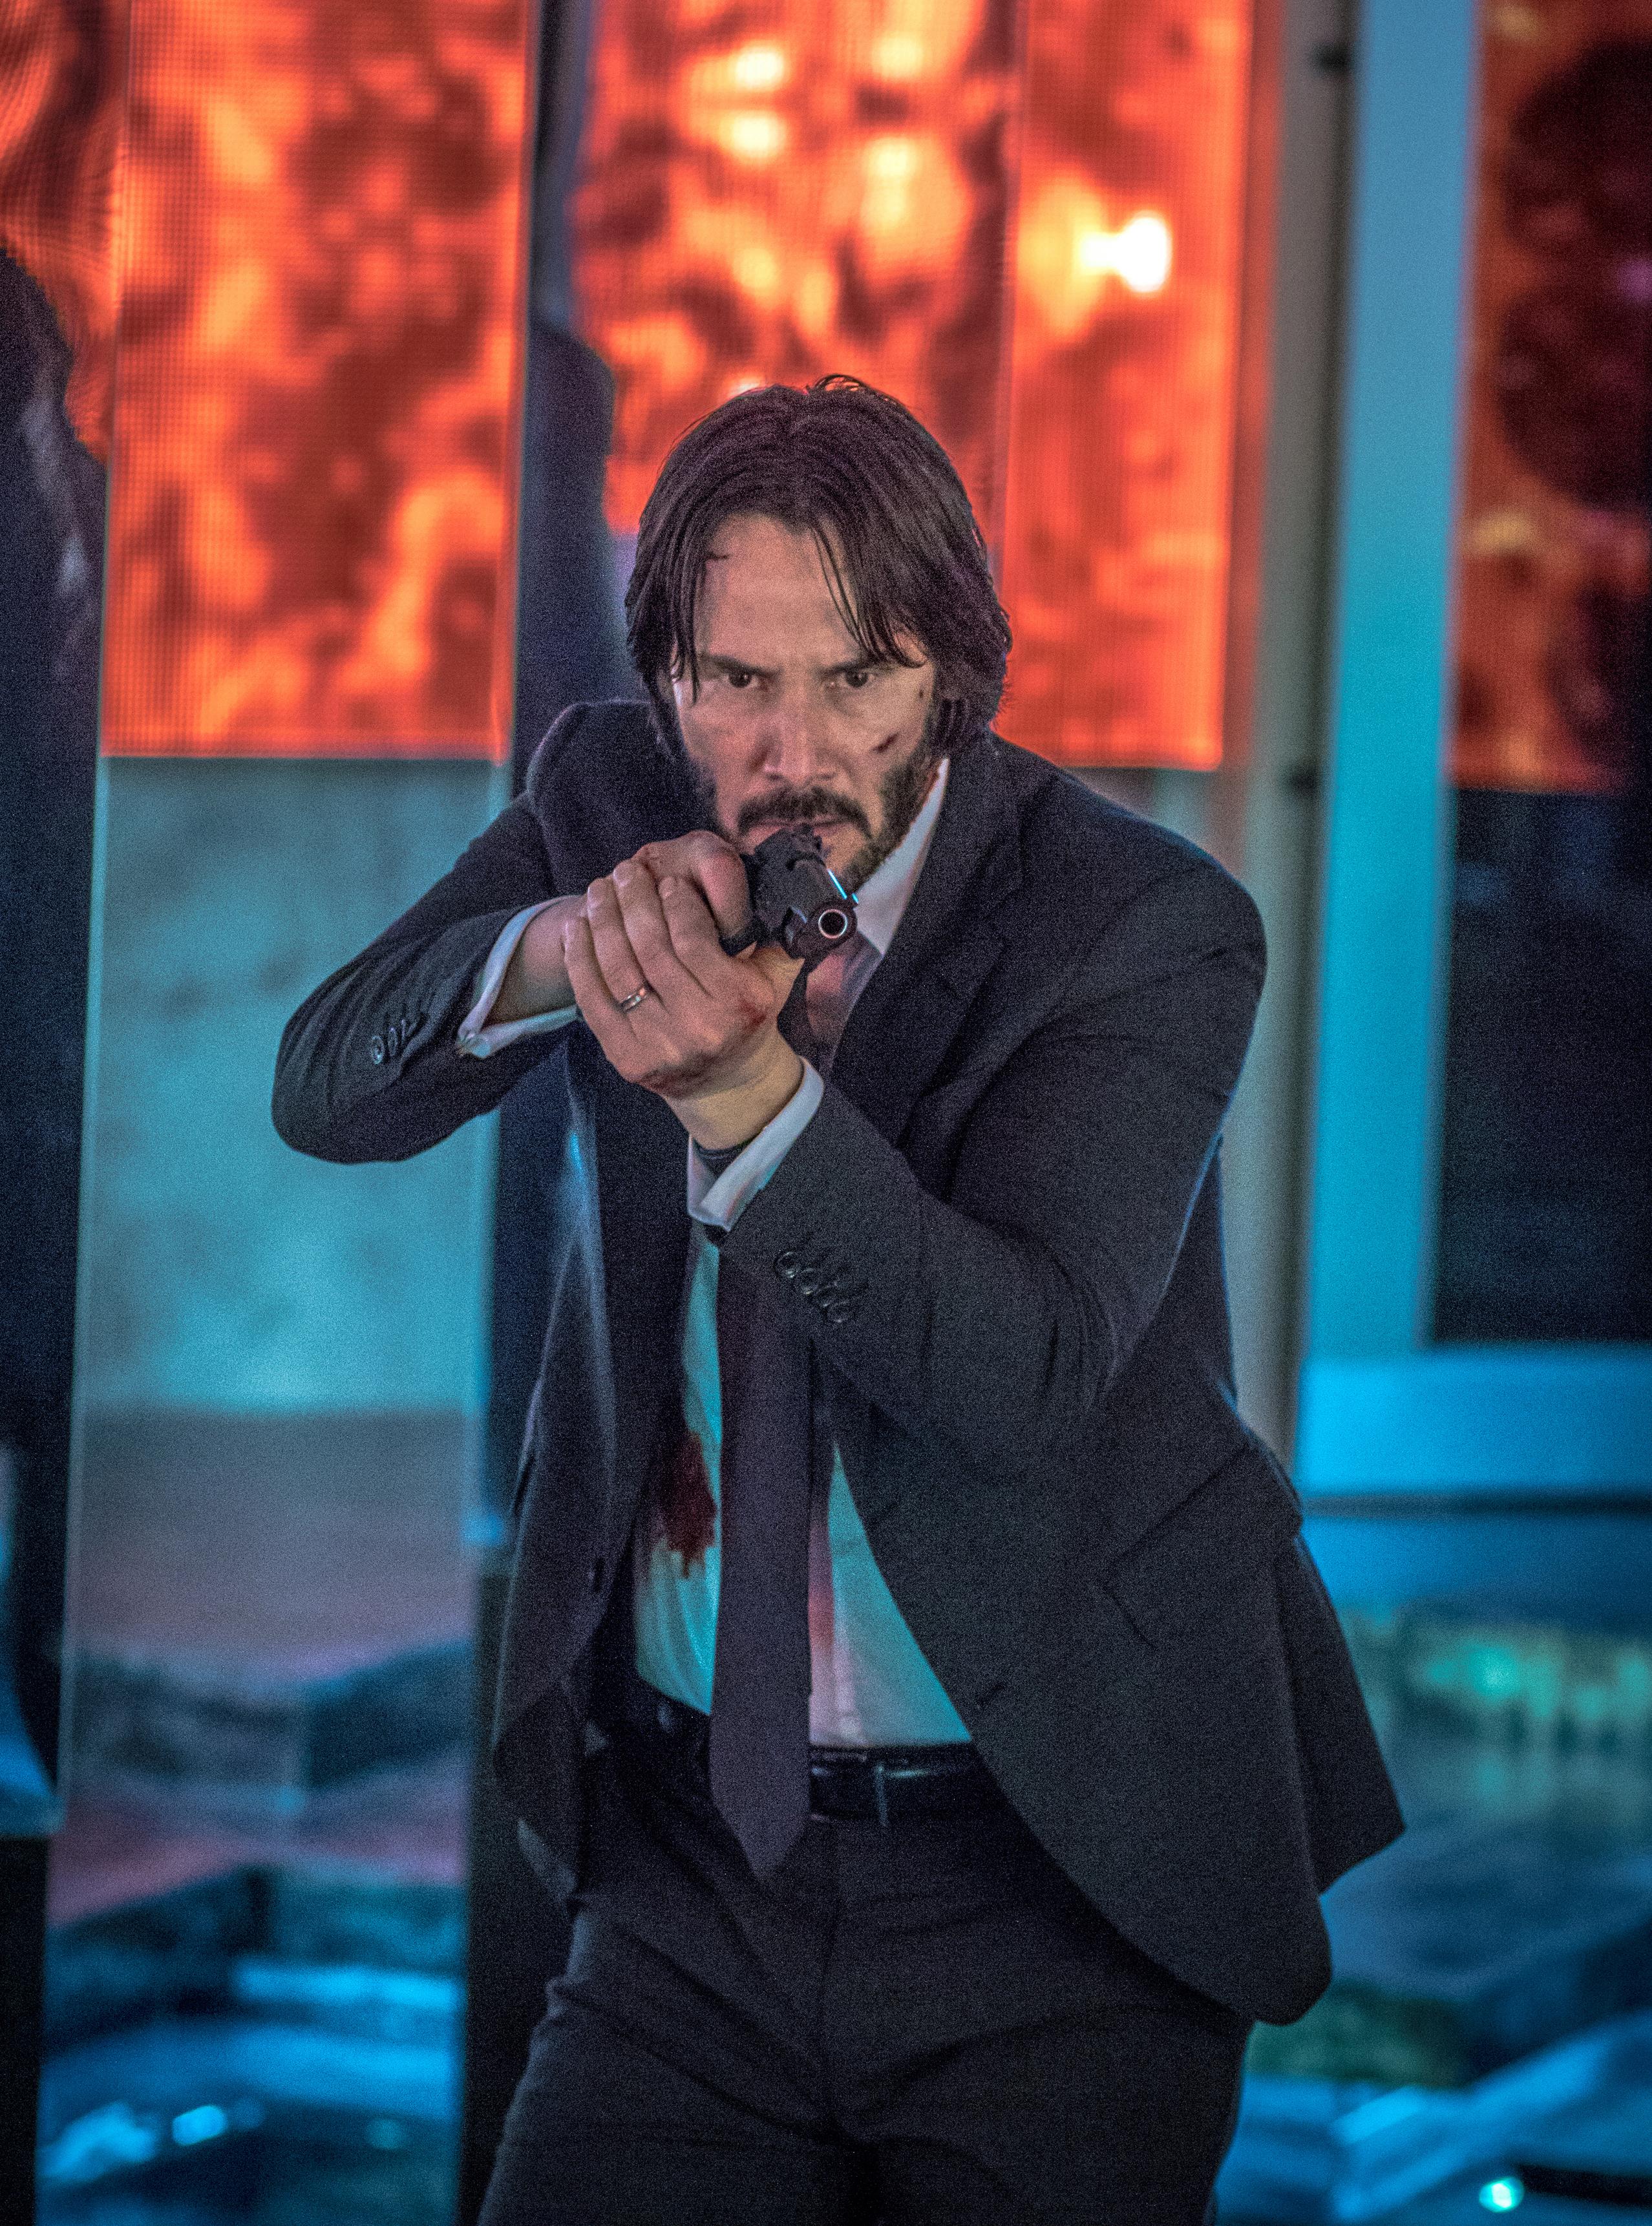 John Wick 3: Dan Laustsen on Shooting Wide and Long Takes in Sequel